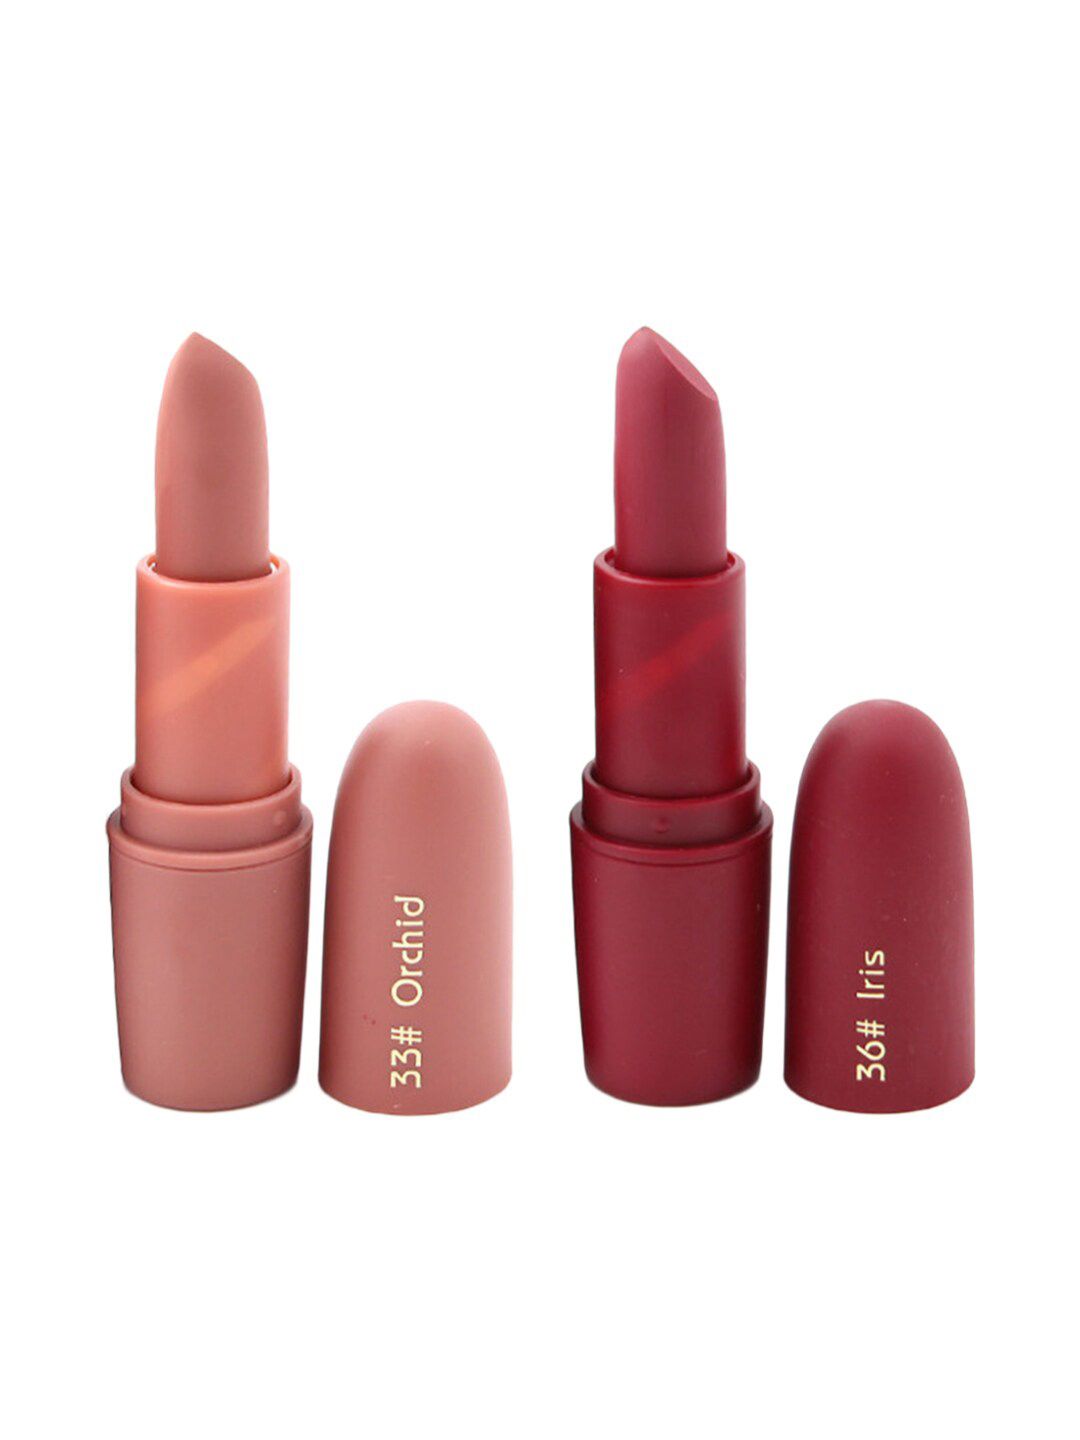 MISS ROSE Professional Make-Up Set of 2 Matte Creamy Lipsticks - Orchid 33 & Iris 36 Price in India